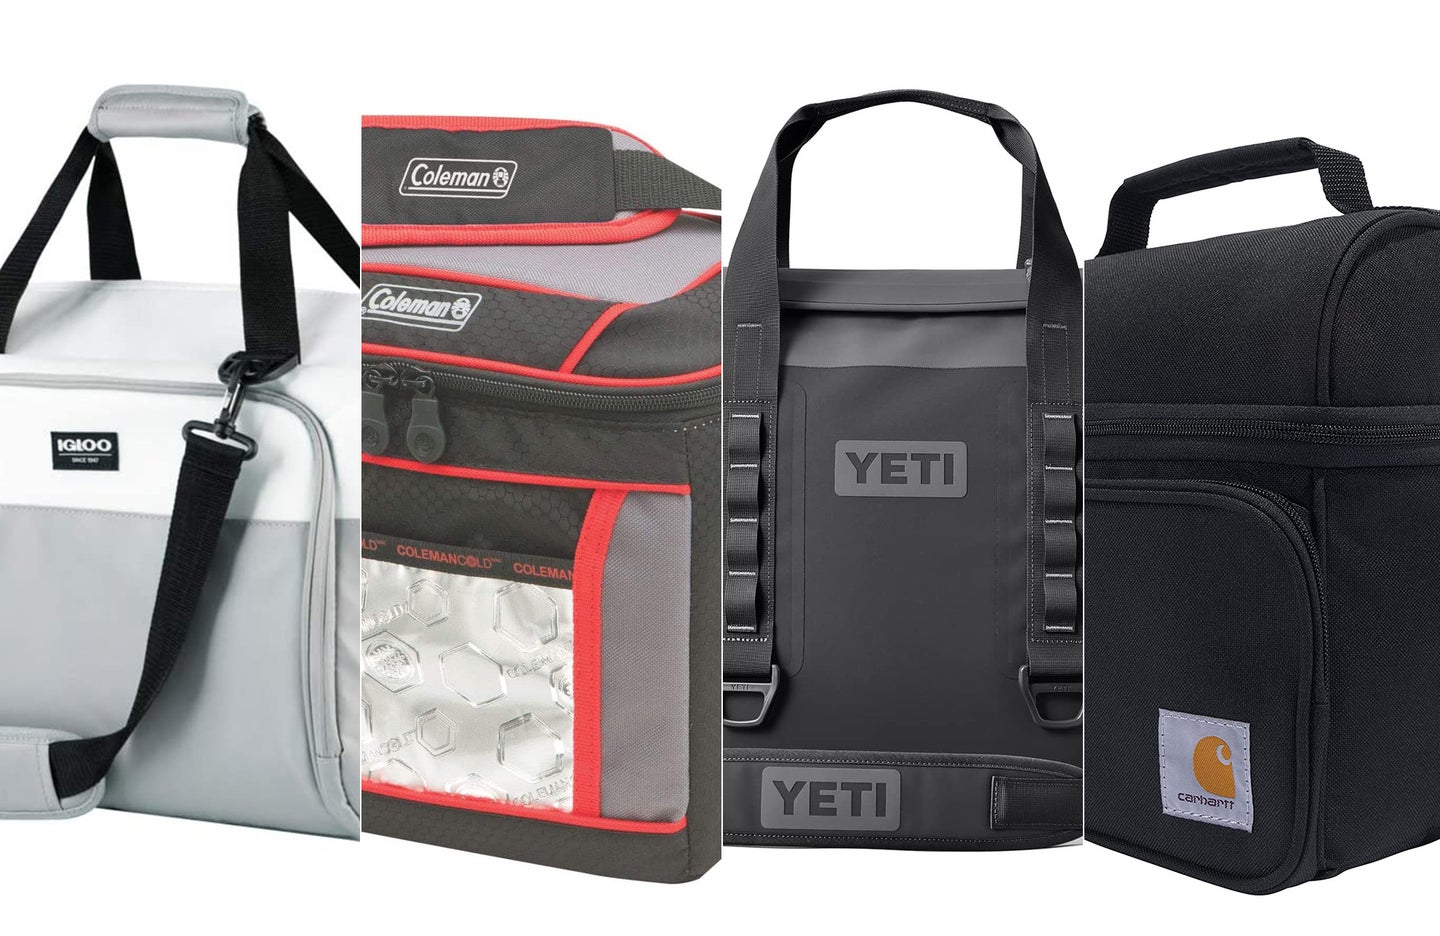 The best cooler bags composited